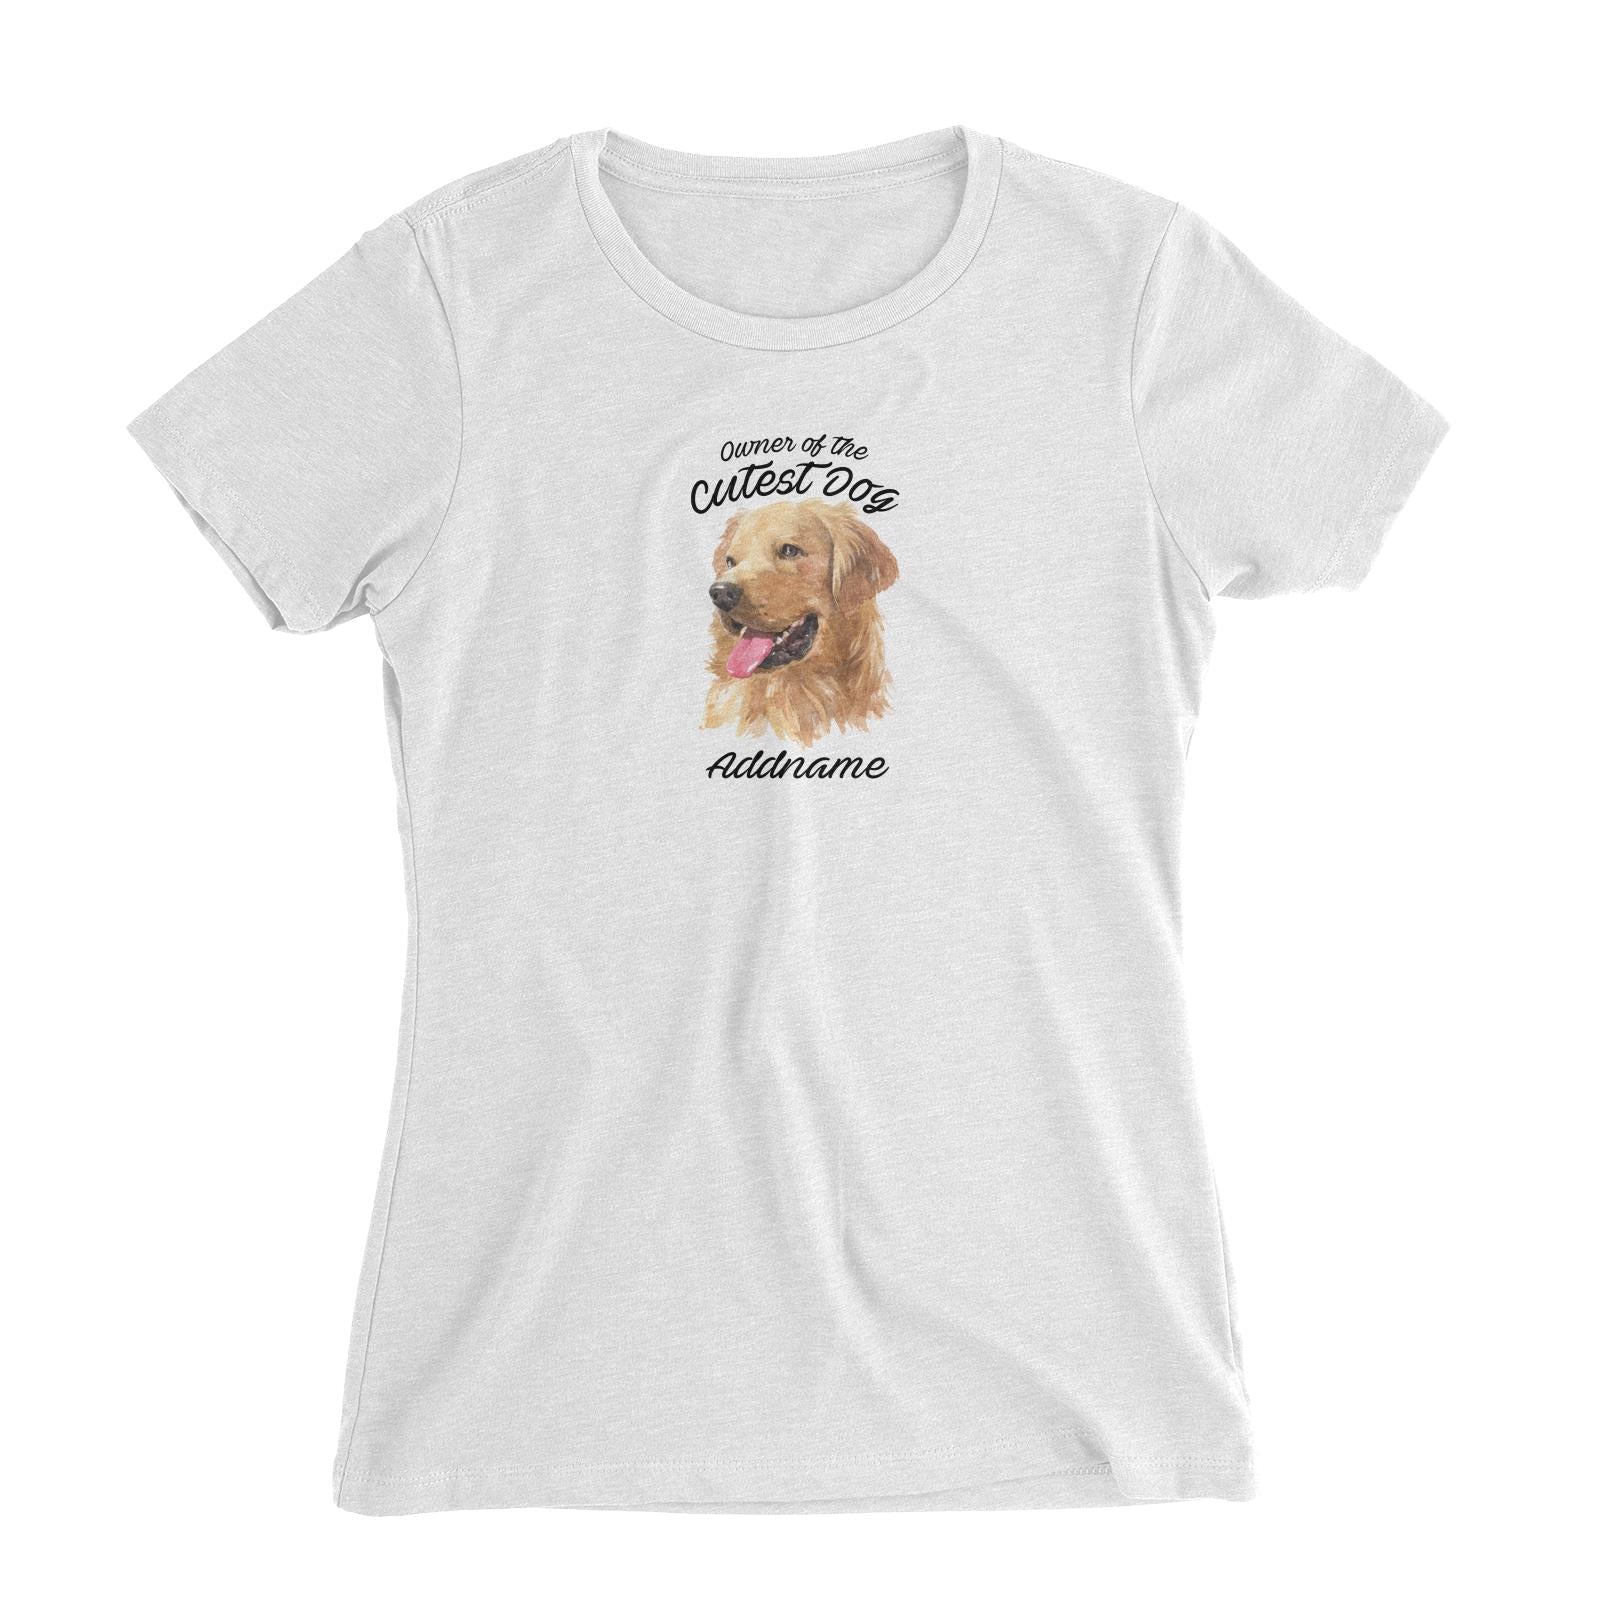 Watercolor Dog Owner Of The Cutest Dog Golden Retriever Left Addname Women's Slim Fit T-Shirt